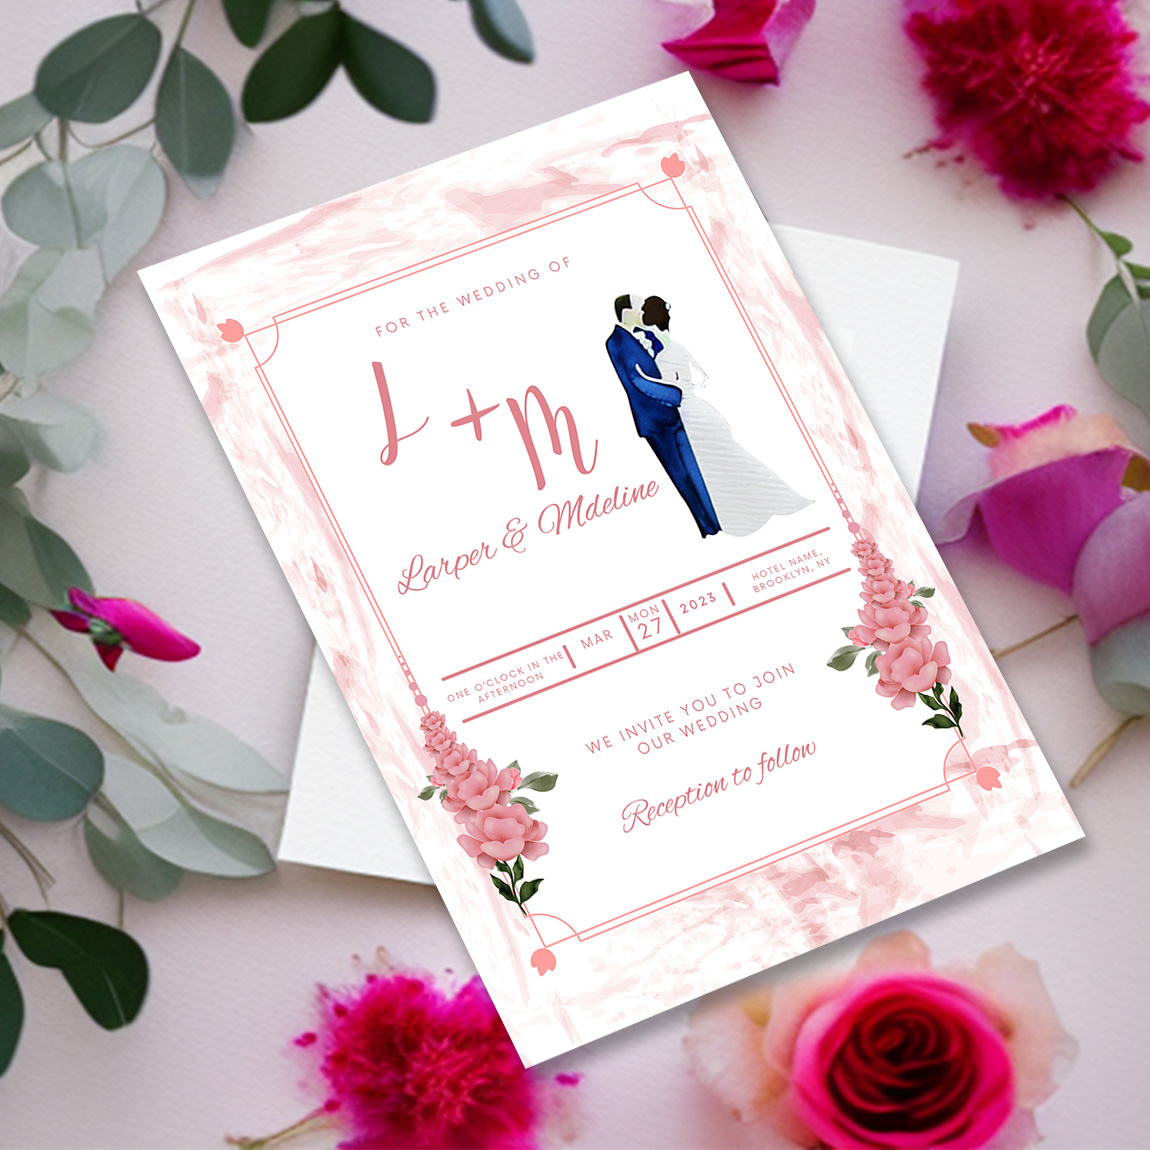 Image with exquisite wedding invitation card in pink tones and flowers.